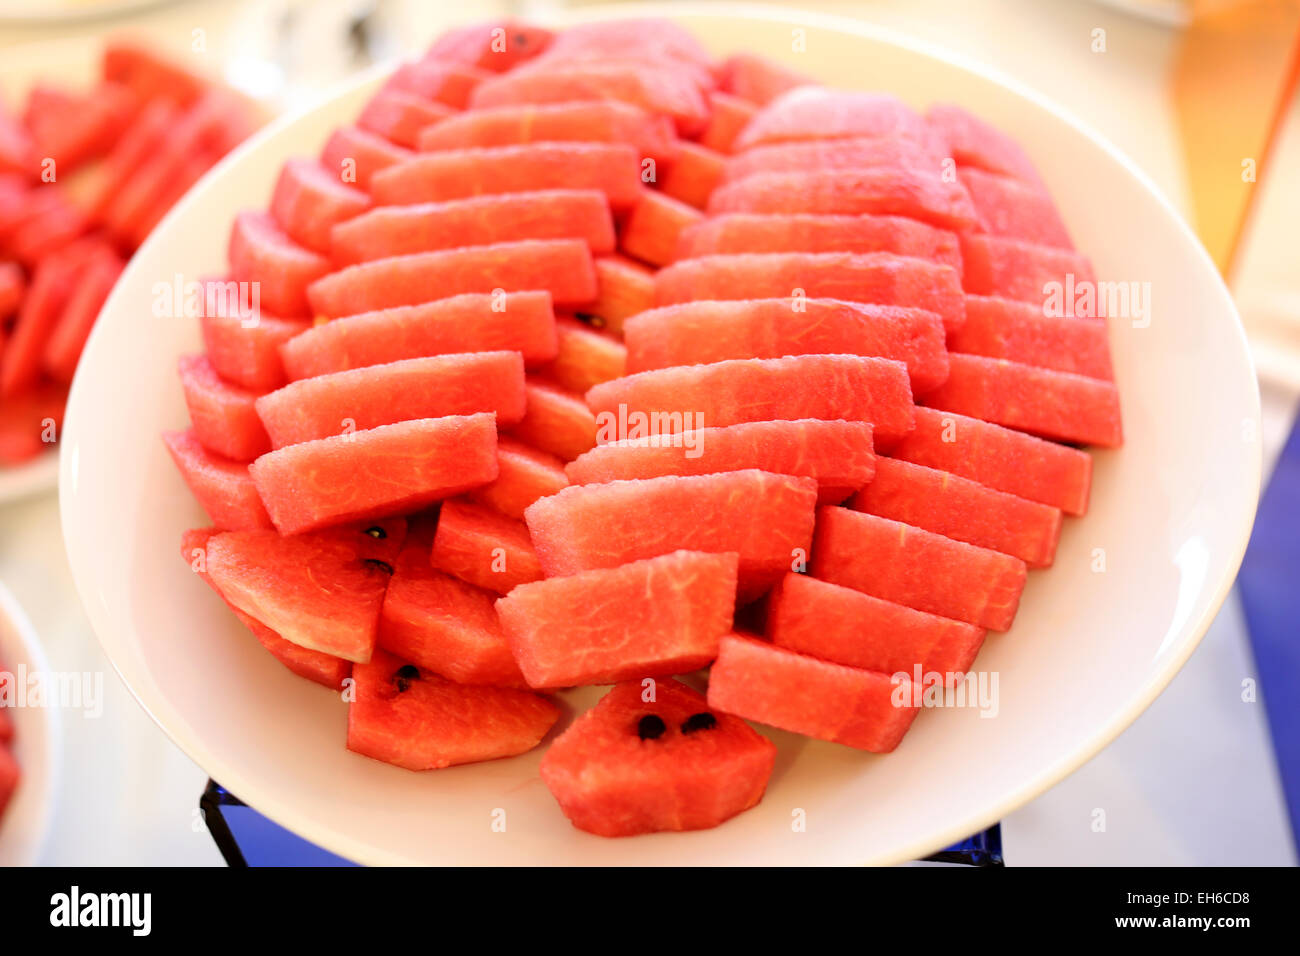 Watermelon cut in pieces in white dish on the foods table. Stock Photo